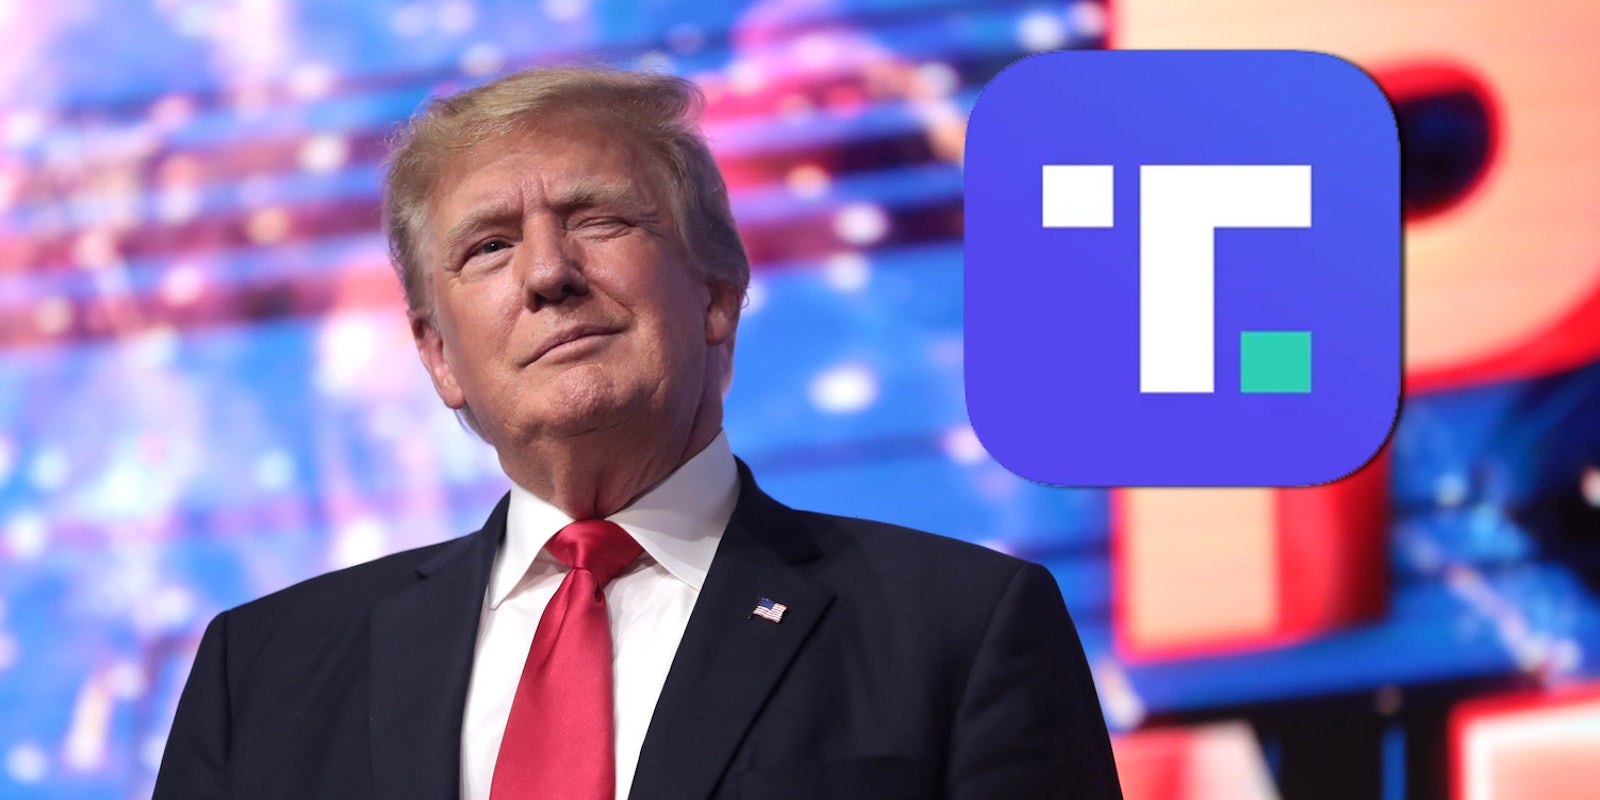 Former President Donald Trump winking. Next to him is the logo for his social media app Truth Social.